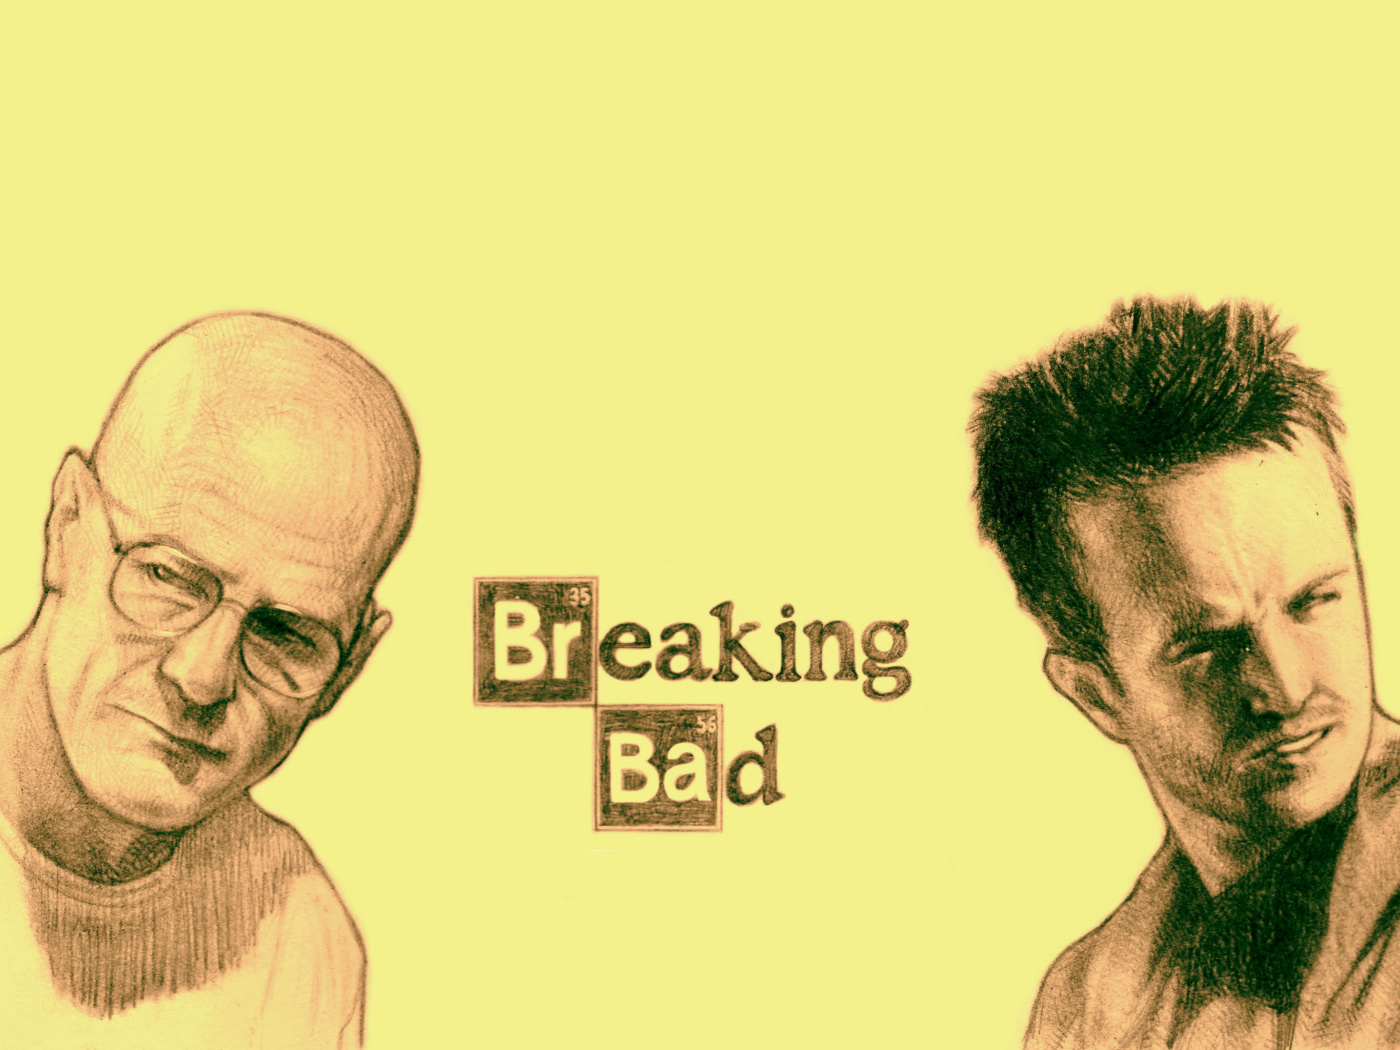 Walter White and Jesse Pinkman in Breaking Bad wallpaper 1400x1050